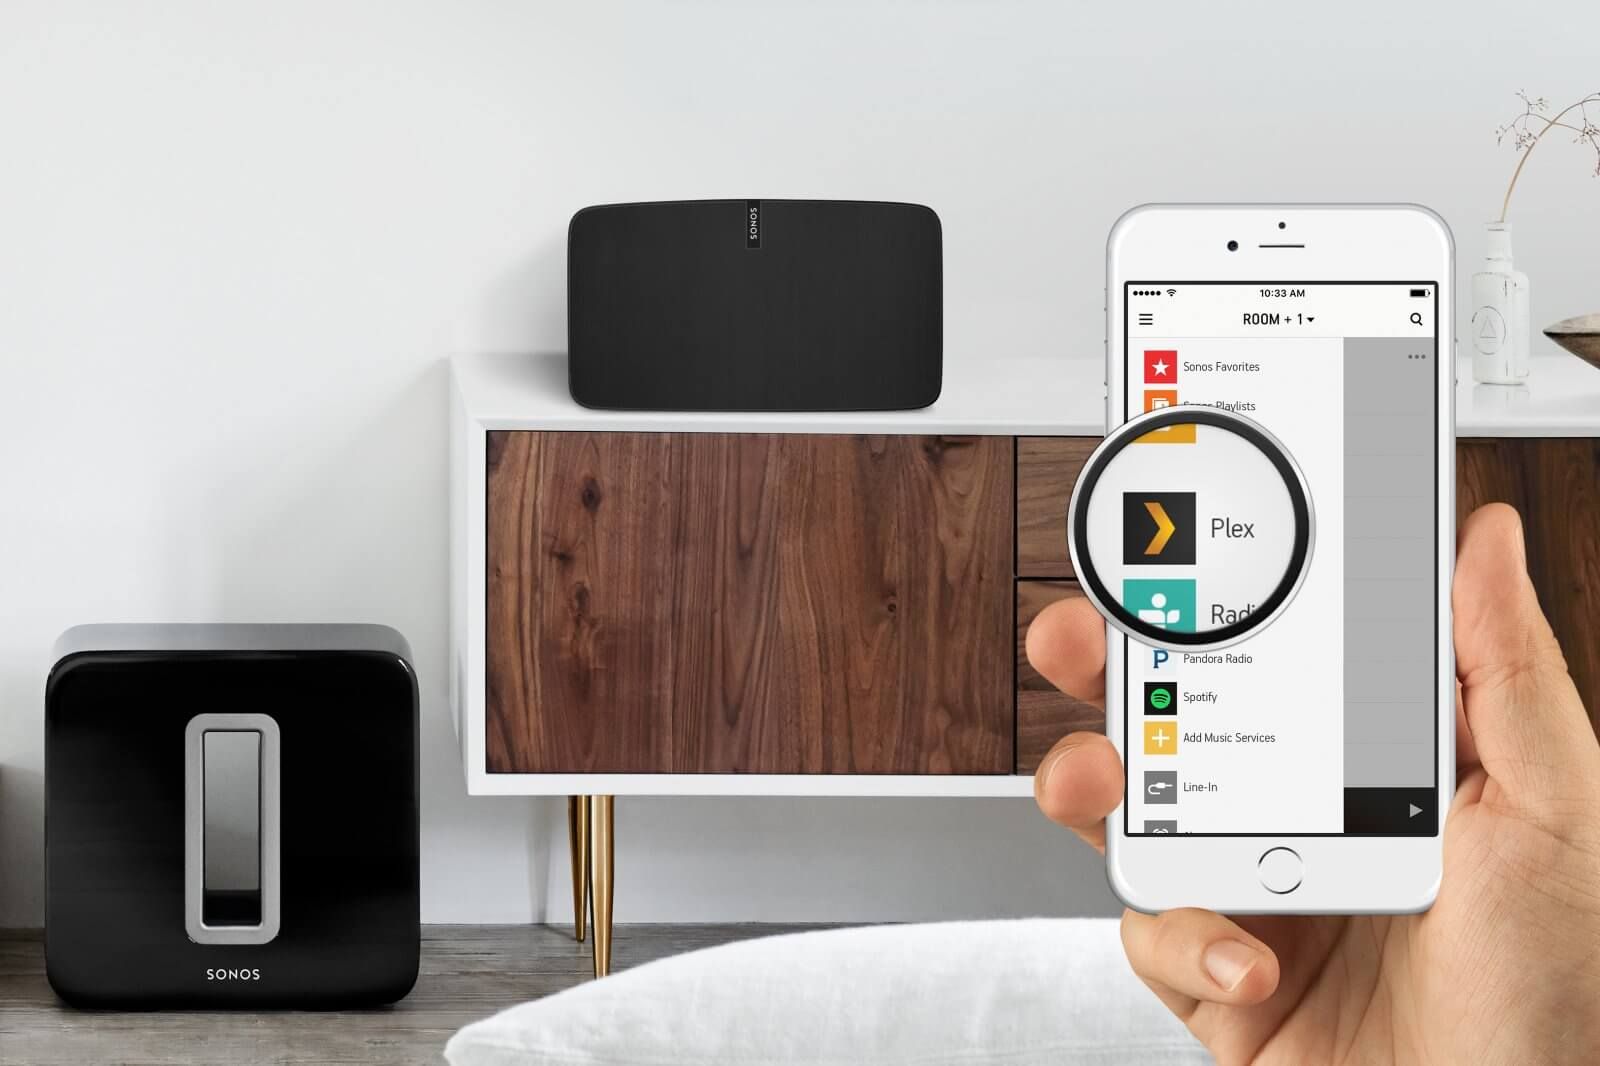 plex now lets you play music on any sonos device from the sonos app image 1